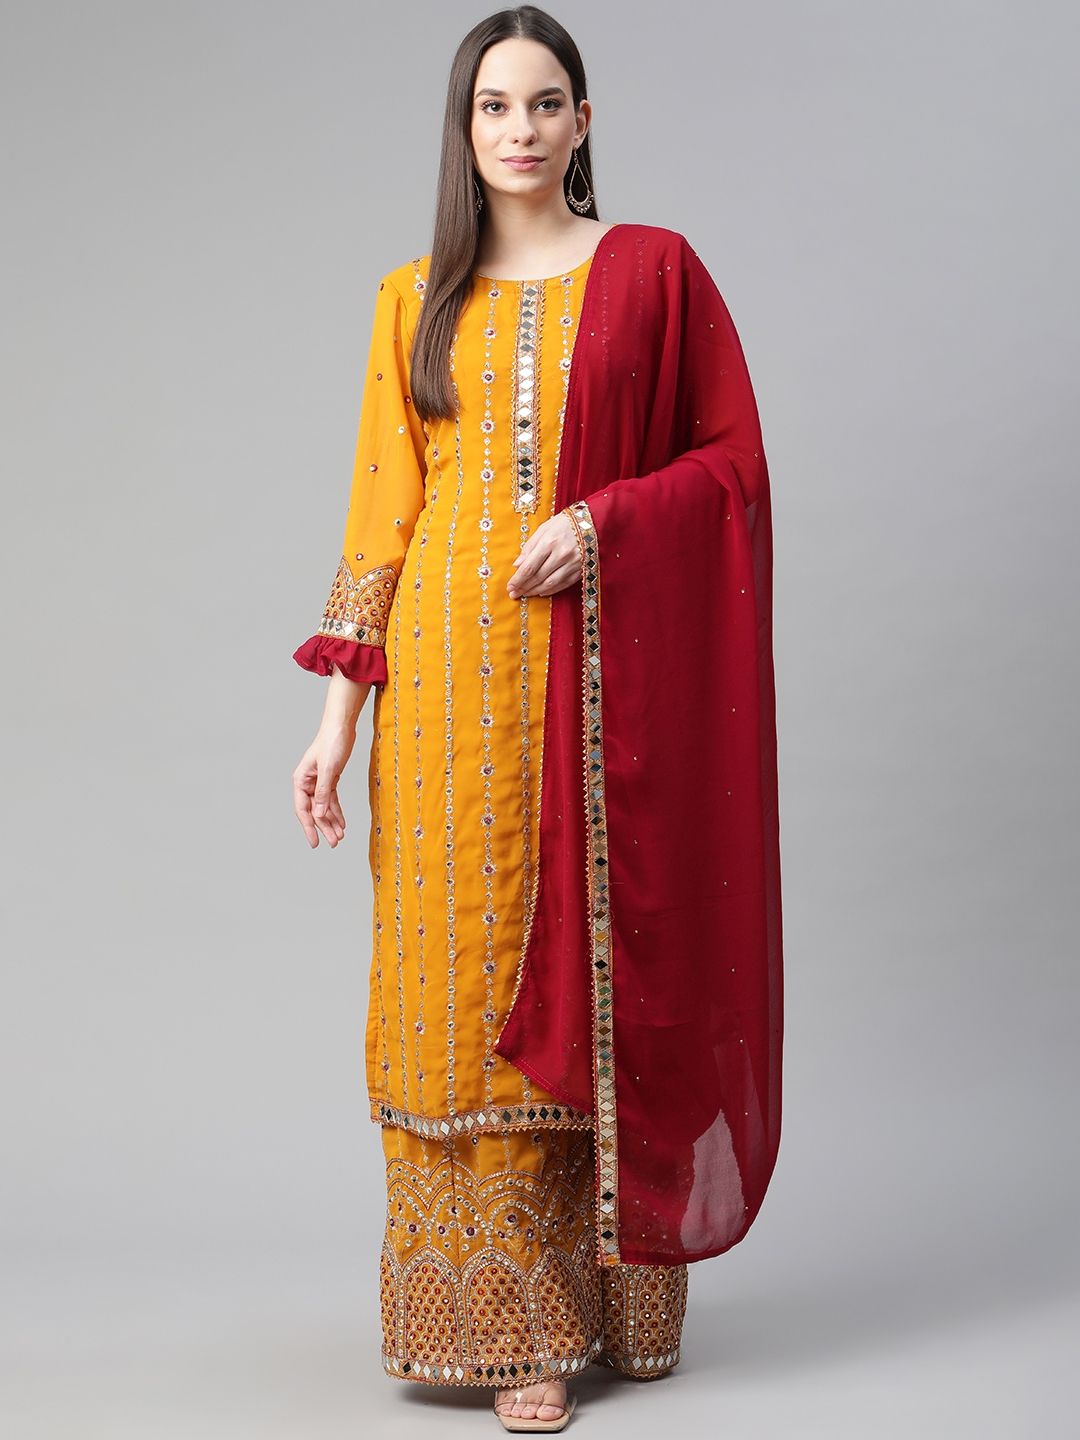 Readiprint Fashions Mustard Embroidered Semi-Stitched Dress Material Price in India